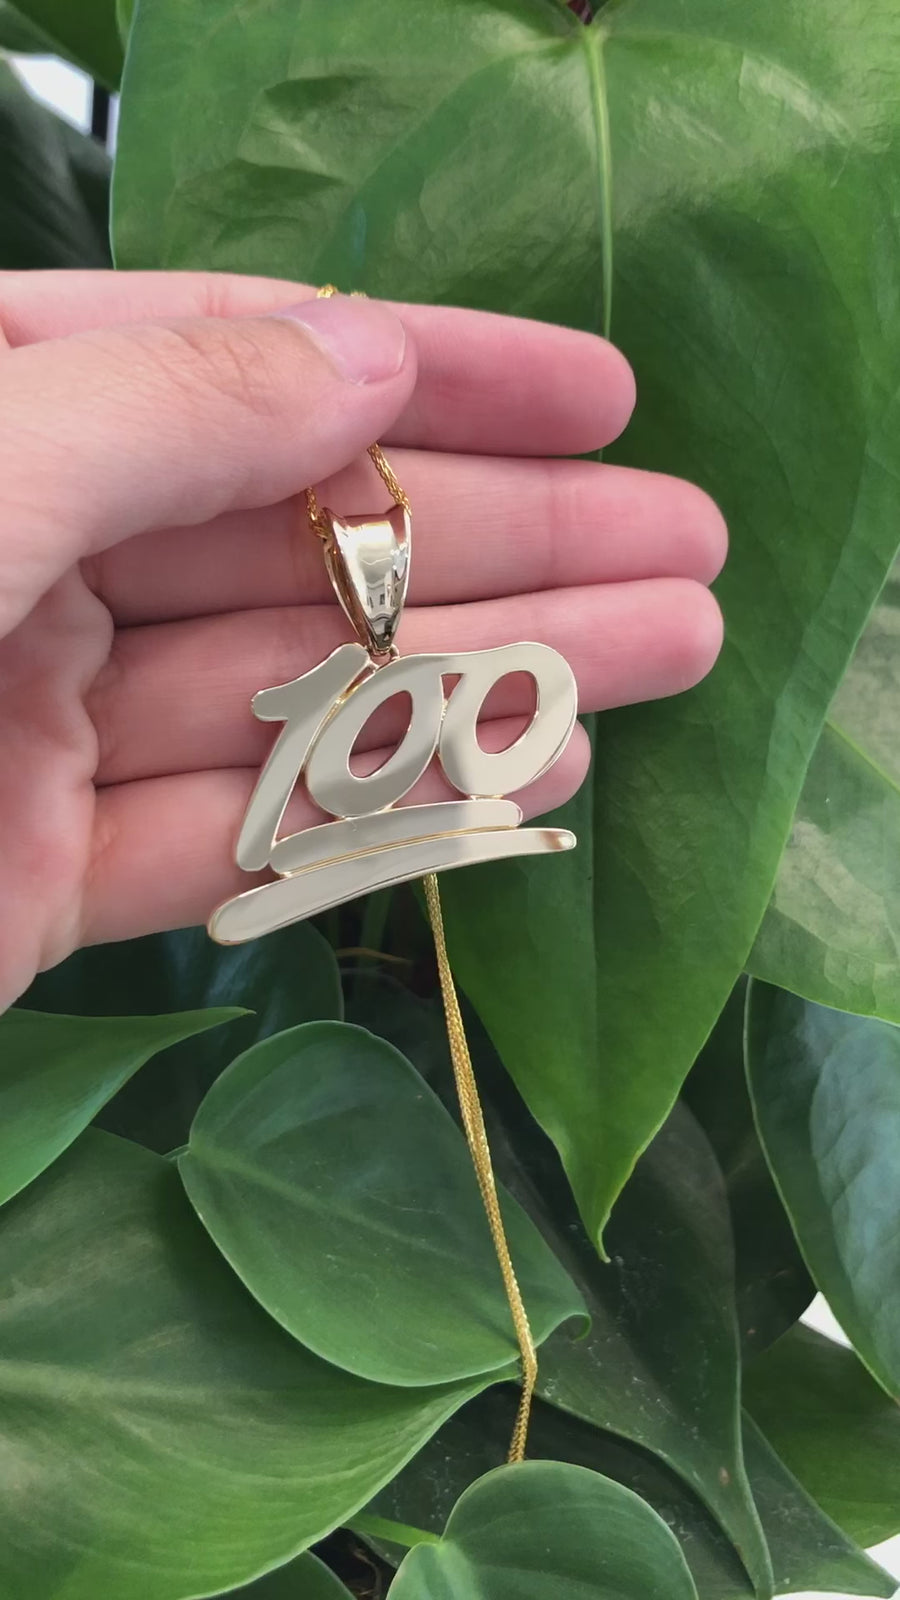 14k Yellow Gold "100" Pendant Necklace